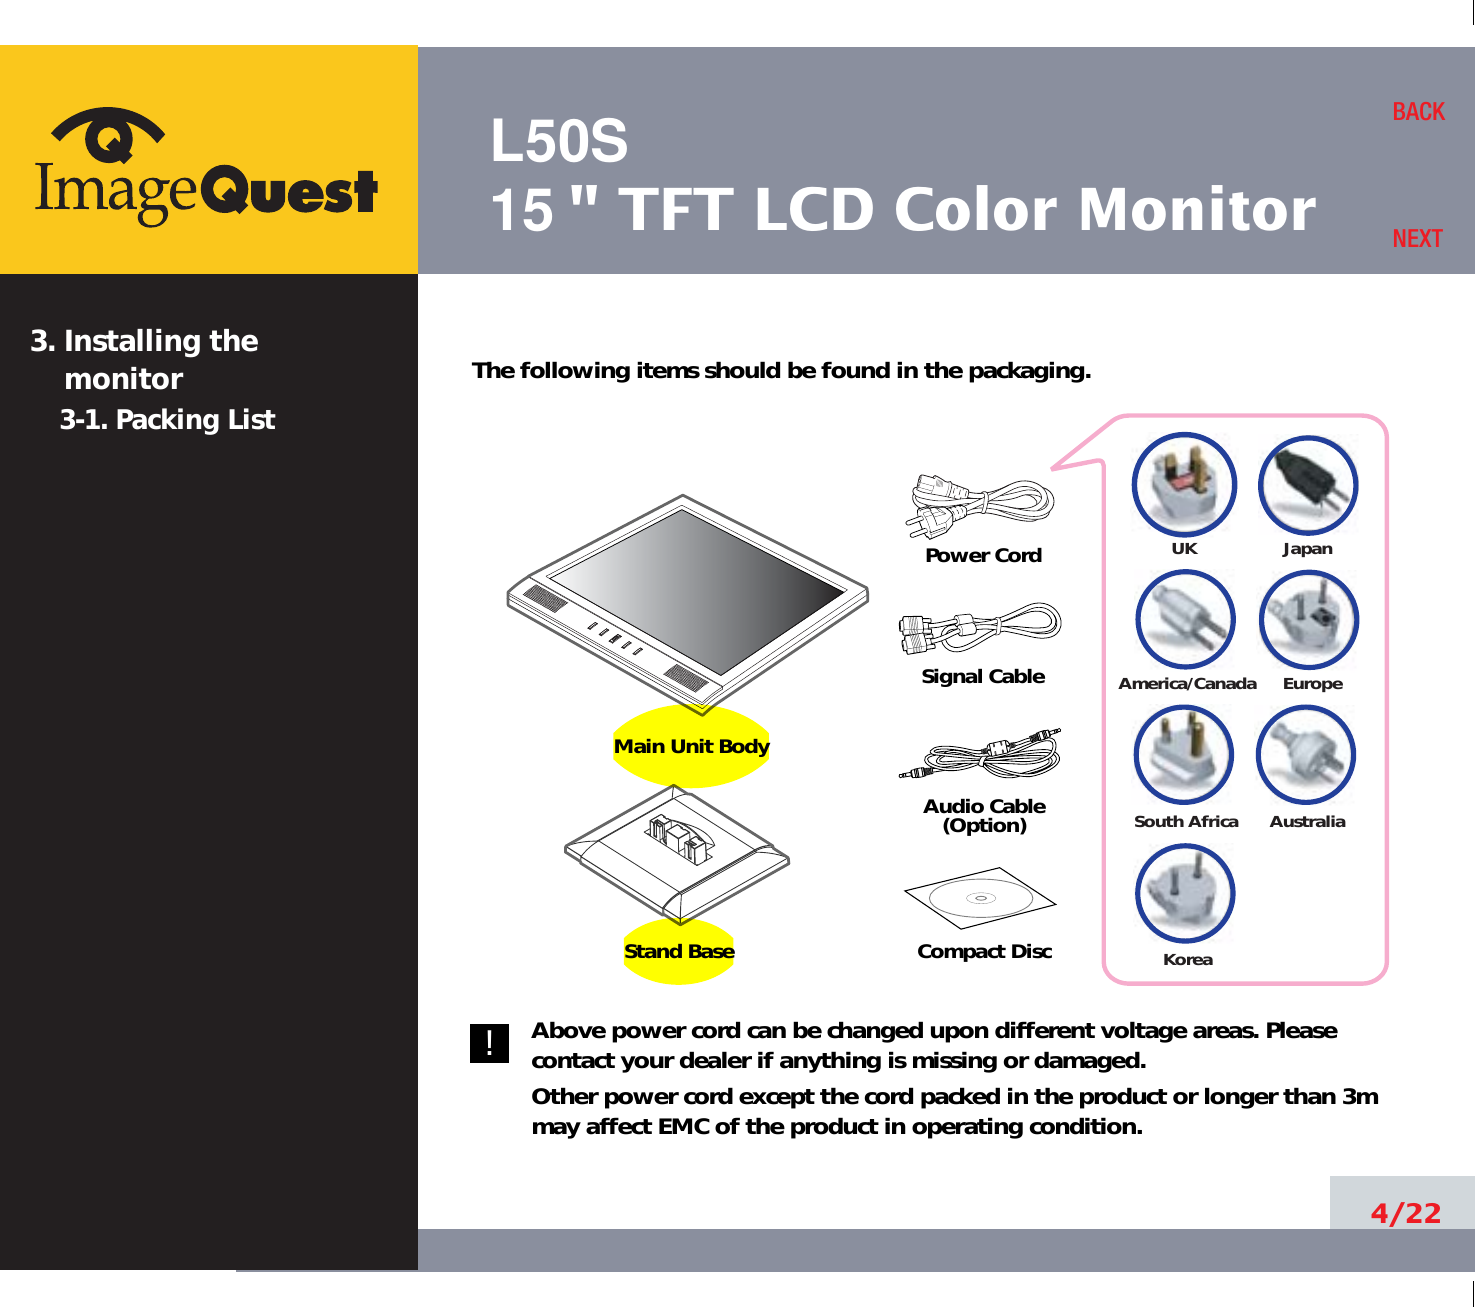 L50S15&quot; TFT LCD Color Monitor4/22BACKNEXTThe following items should be found in the packaging.Above power cord can be changed upon different voltage areas. Pleasecontact your dealer if anything is missing or damaged.Other power cord except the cord packed in the product or longer than 3mmay affect EMC of the product in operating condition.3. Installing the monitor3-1. Packing List!UKAmerica/CanadaJapanAustraliaKoreaEuropeSouth AfricaPower CordSignal CableAudio Cable(Option)Compact DiscStand BaseMain Unit Body